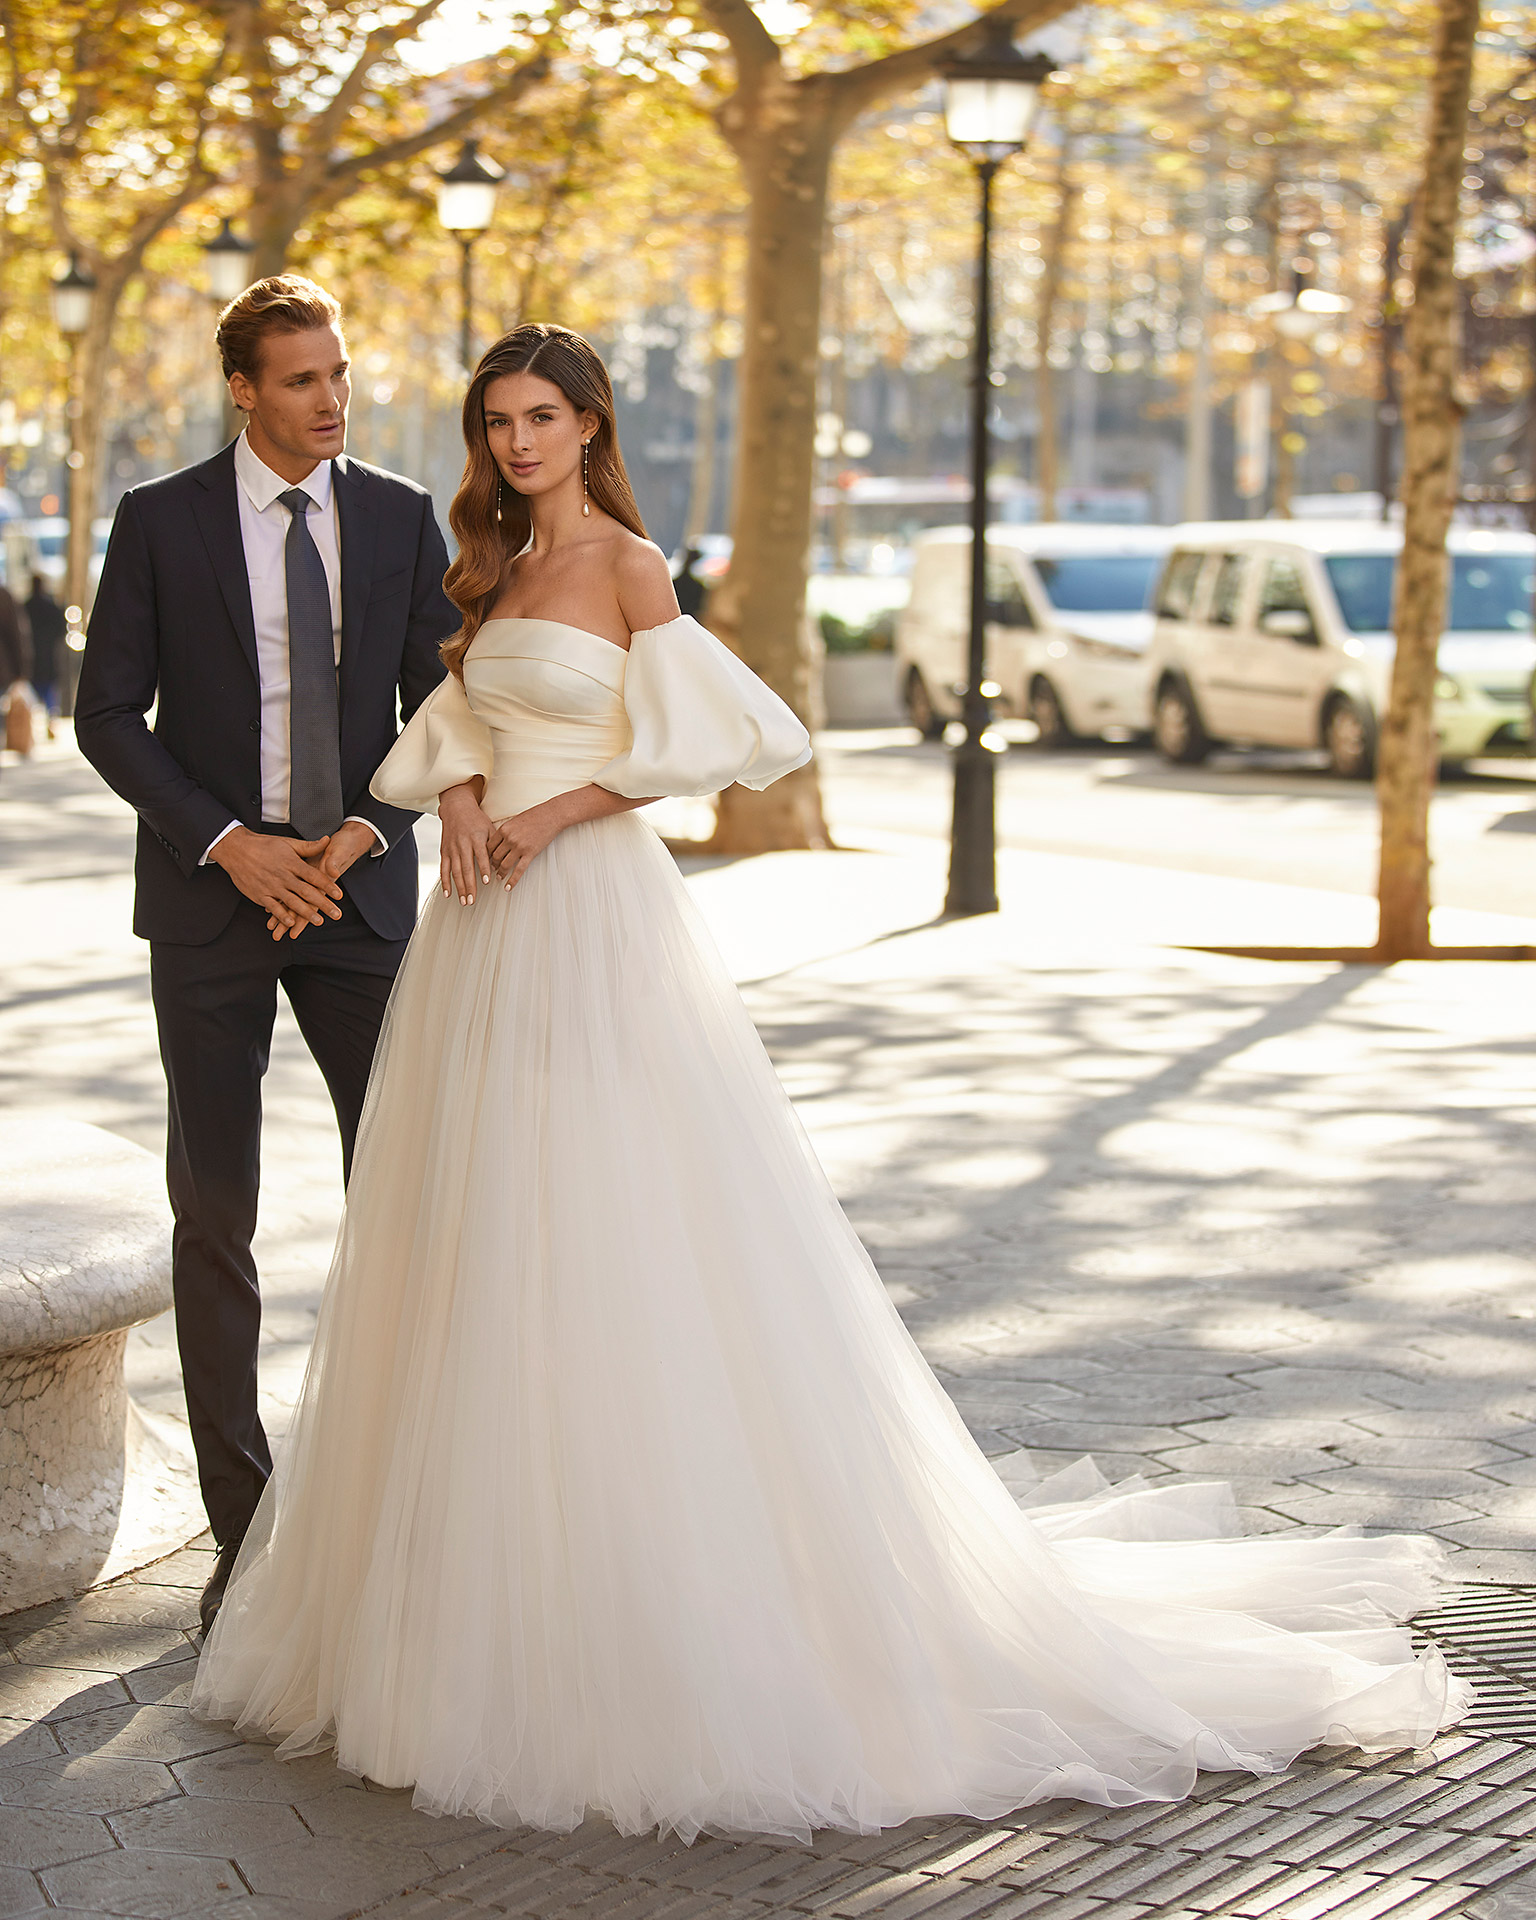 Modern princess-style wedding dress, made of tulle, featuring a matt Mikado pleated bodice; with a strapless neckline, a button-up back, and puffed sleeves. Trendy Luna Novias design made of tulle combined with matt Mikado. LUNA_NOVIAS.